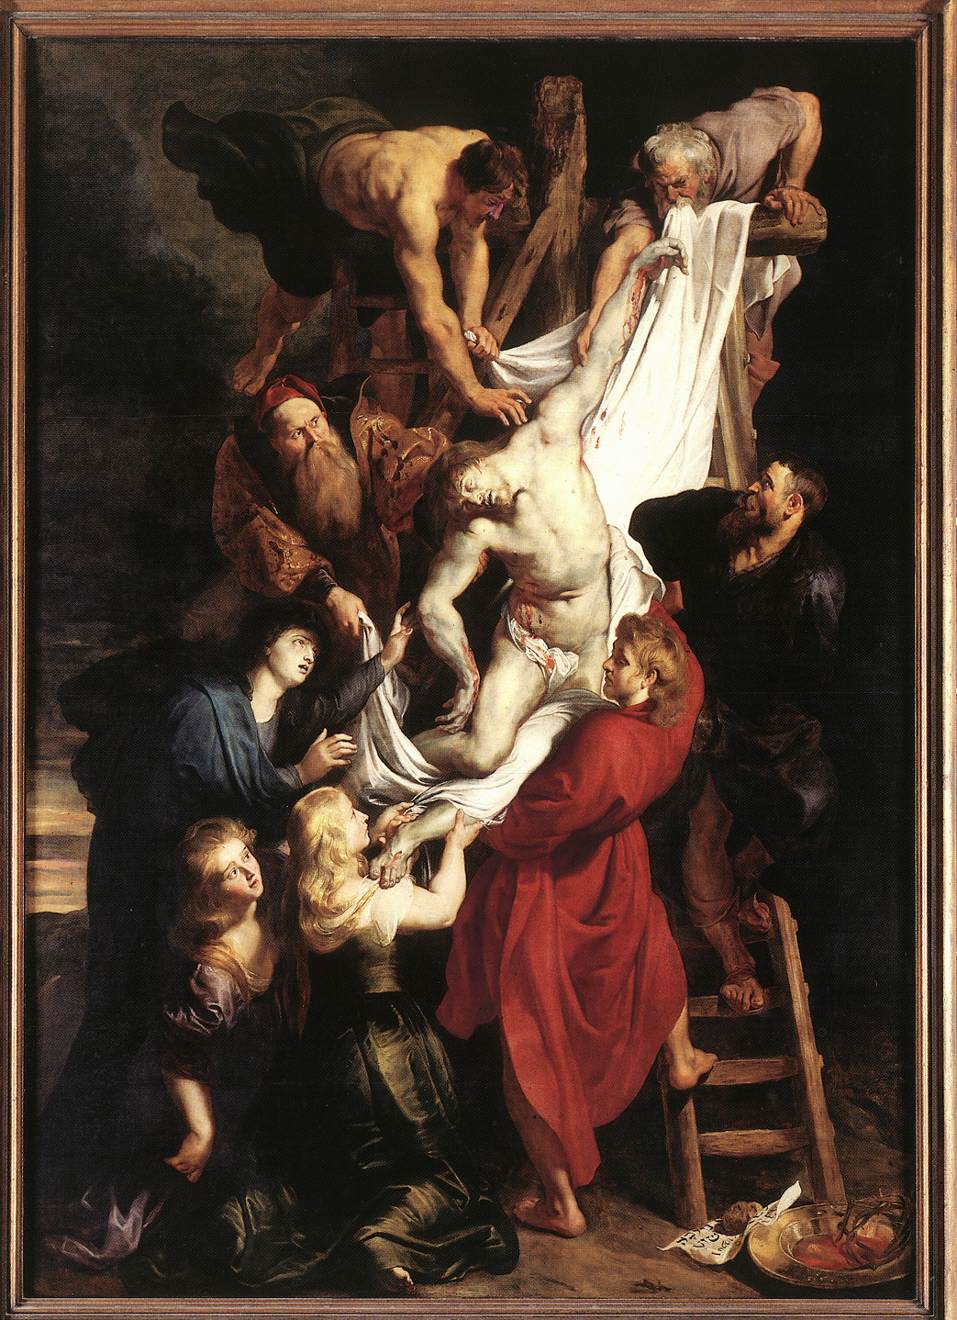 Descent from the Cross (centre panel) by Peter Paul Rubens Reproduction Oil Painting on Canvas